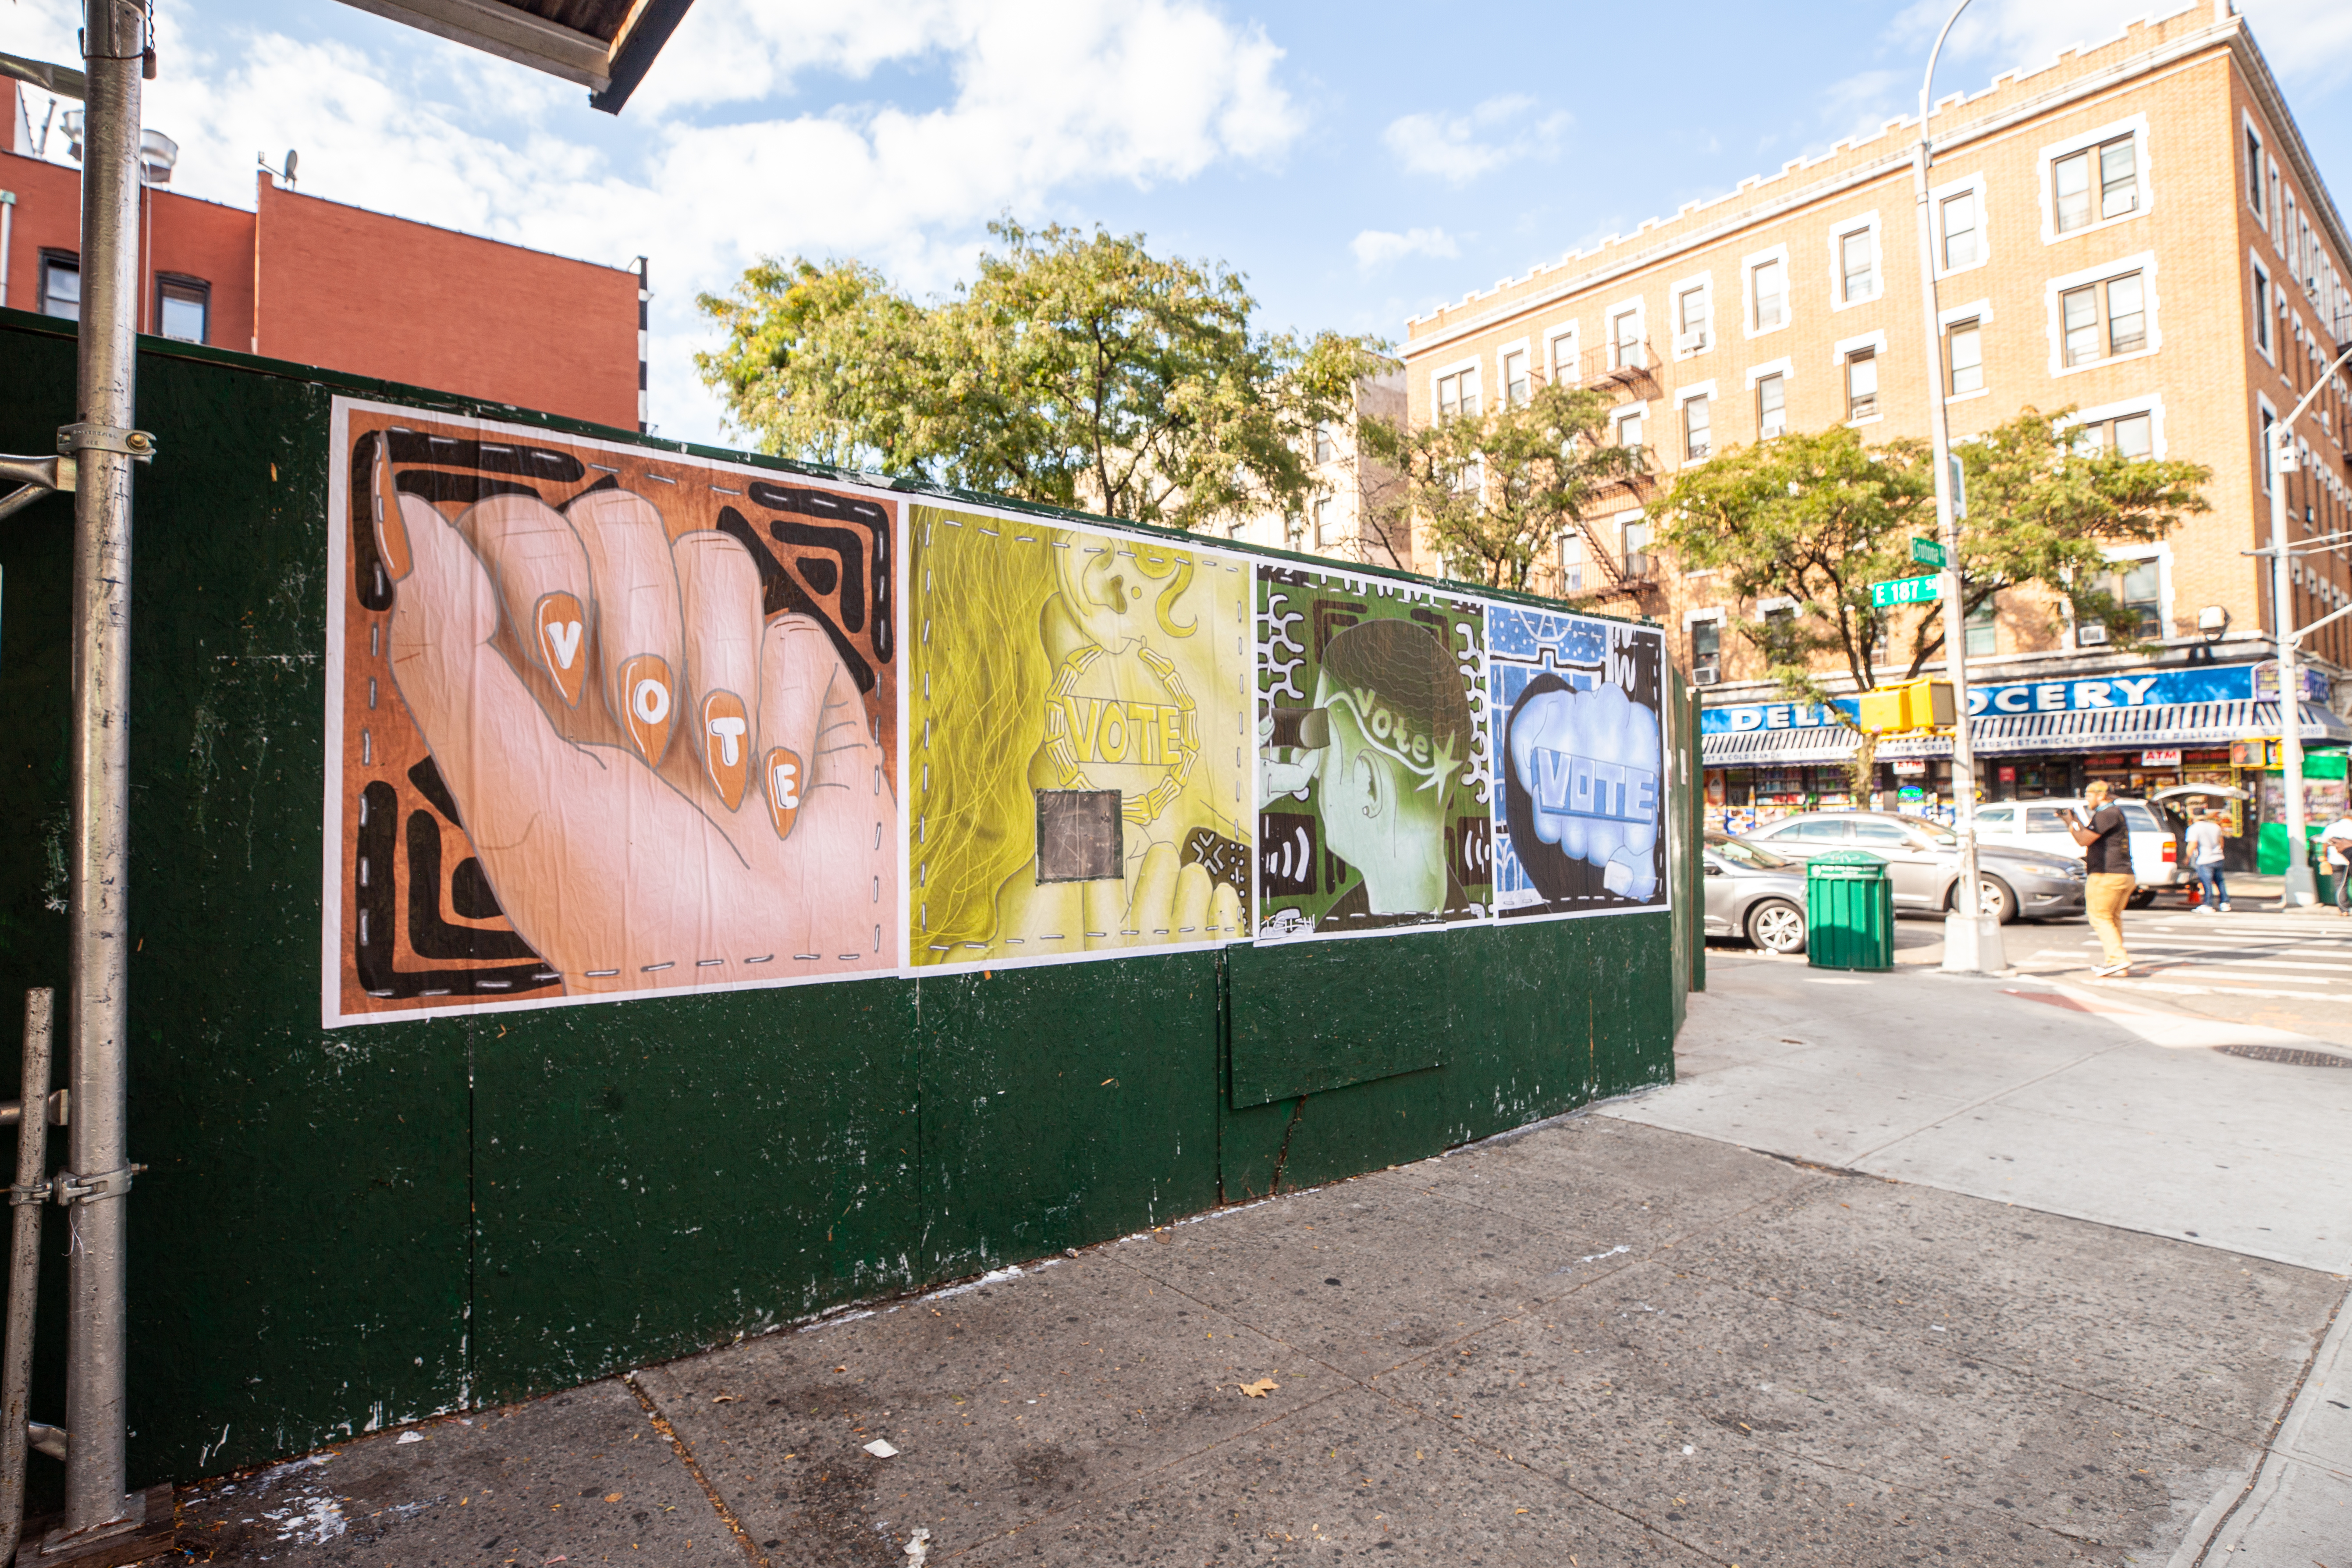 Facebook's "Voting Is Voice" Campaign Premiers With Bronx Murals